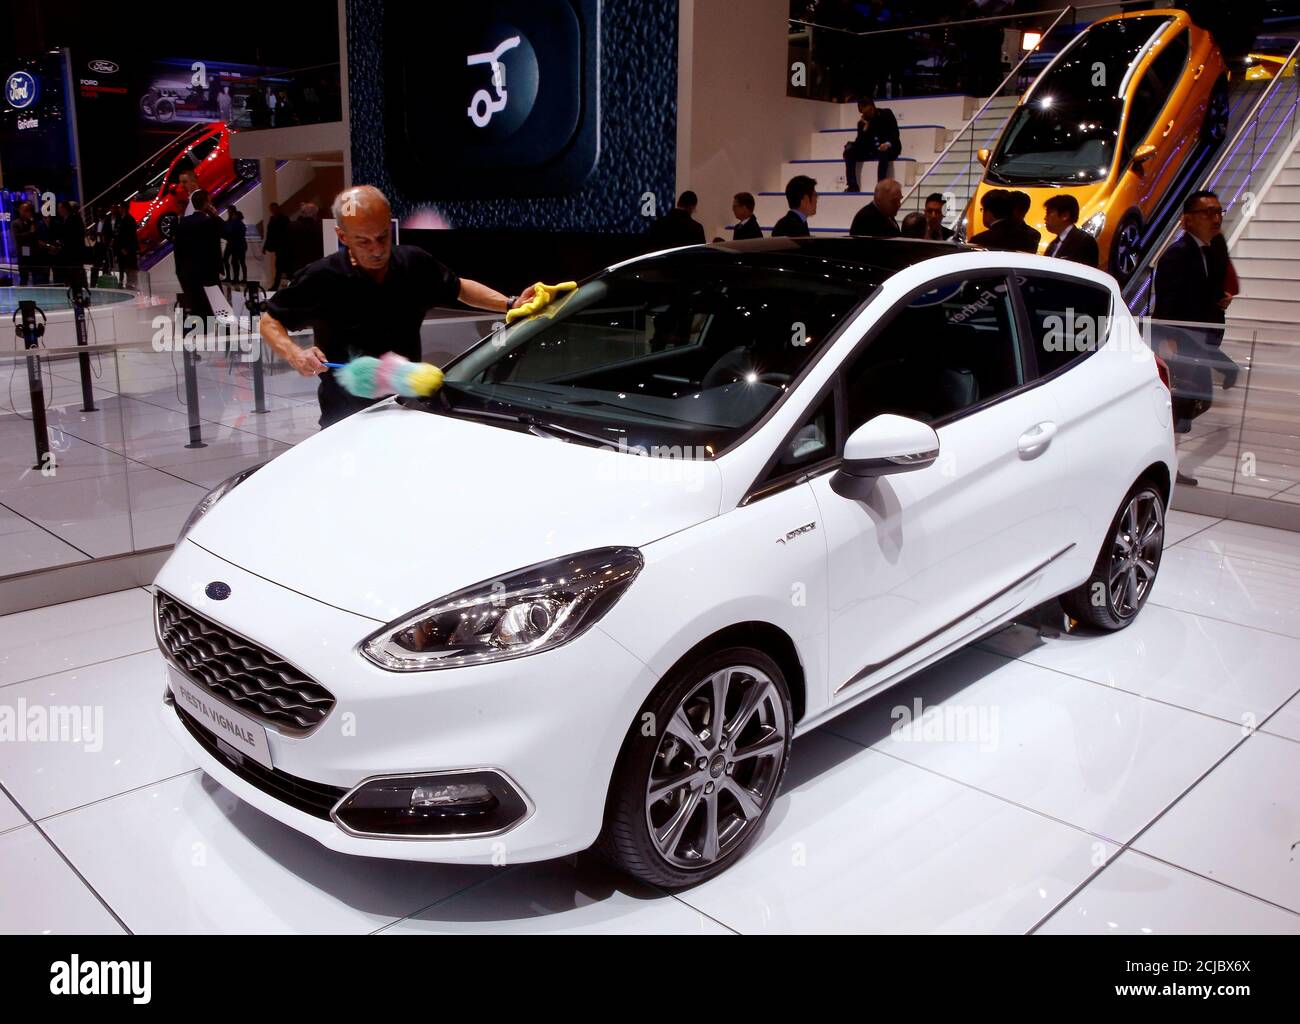 A Ford Fiesta Vignale car is seen during the 87th International Motor Show  at Palexpo in Geneva, Switzerland March 8, 2017. REUTERS/Arnd Wiegmann  Stock Photo - Alamy